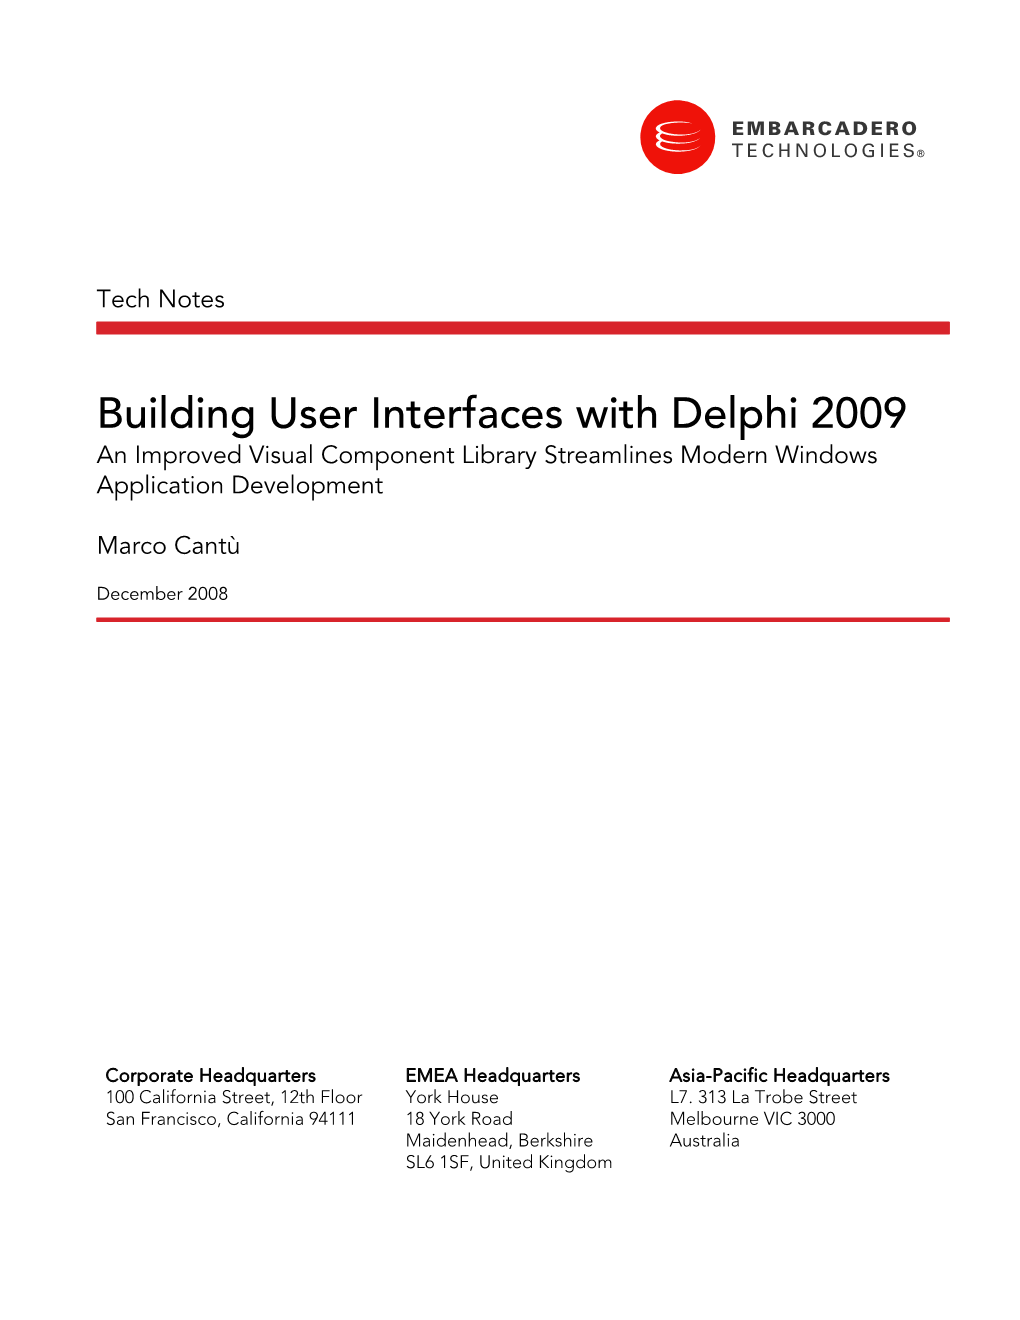 Building User Interfaces with Delphi 2009 an Improved Visual Component Library Streamlines Modern Windows Application Development